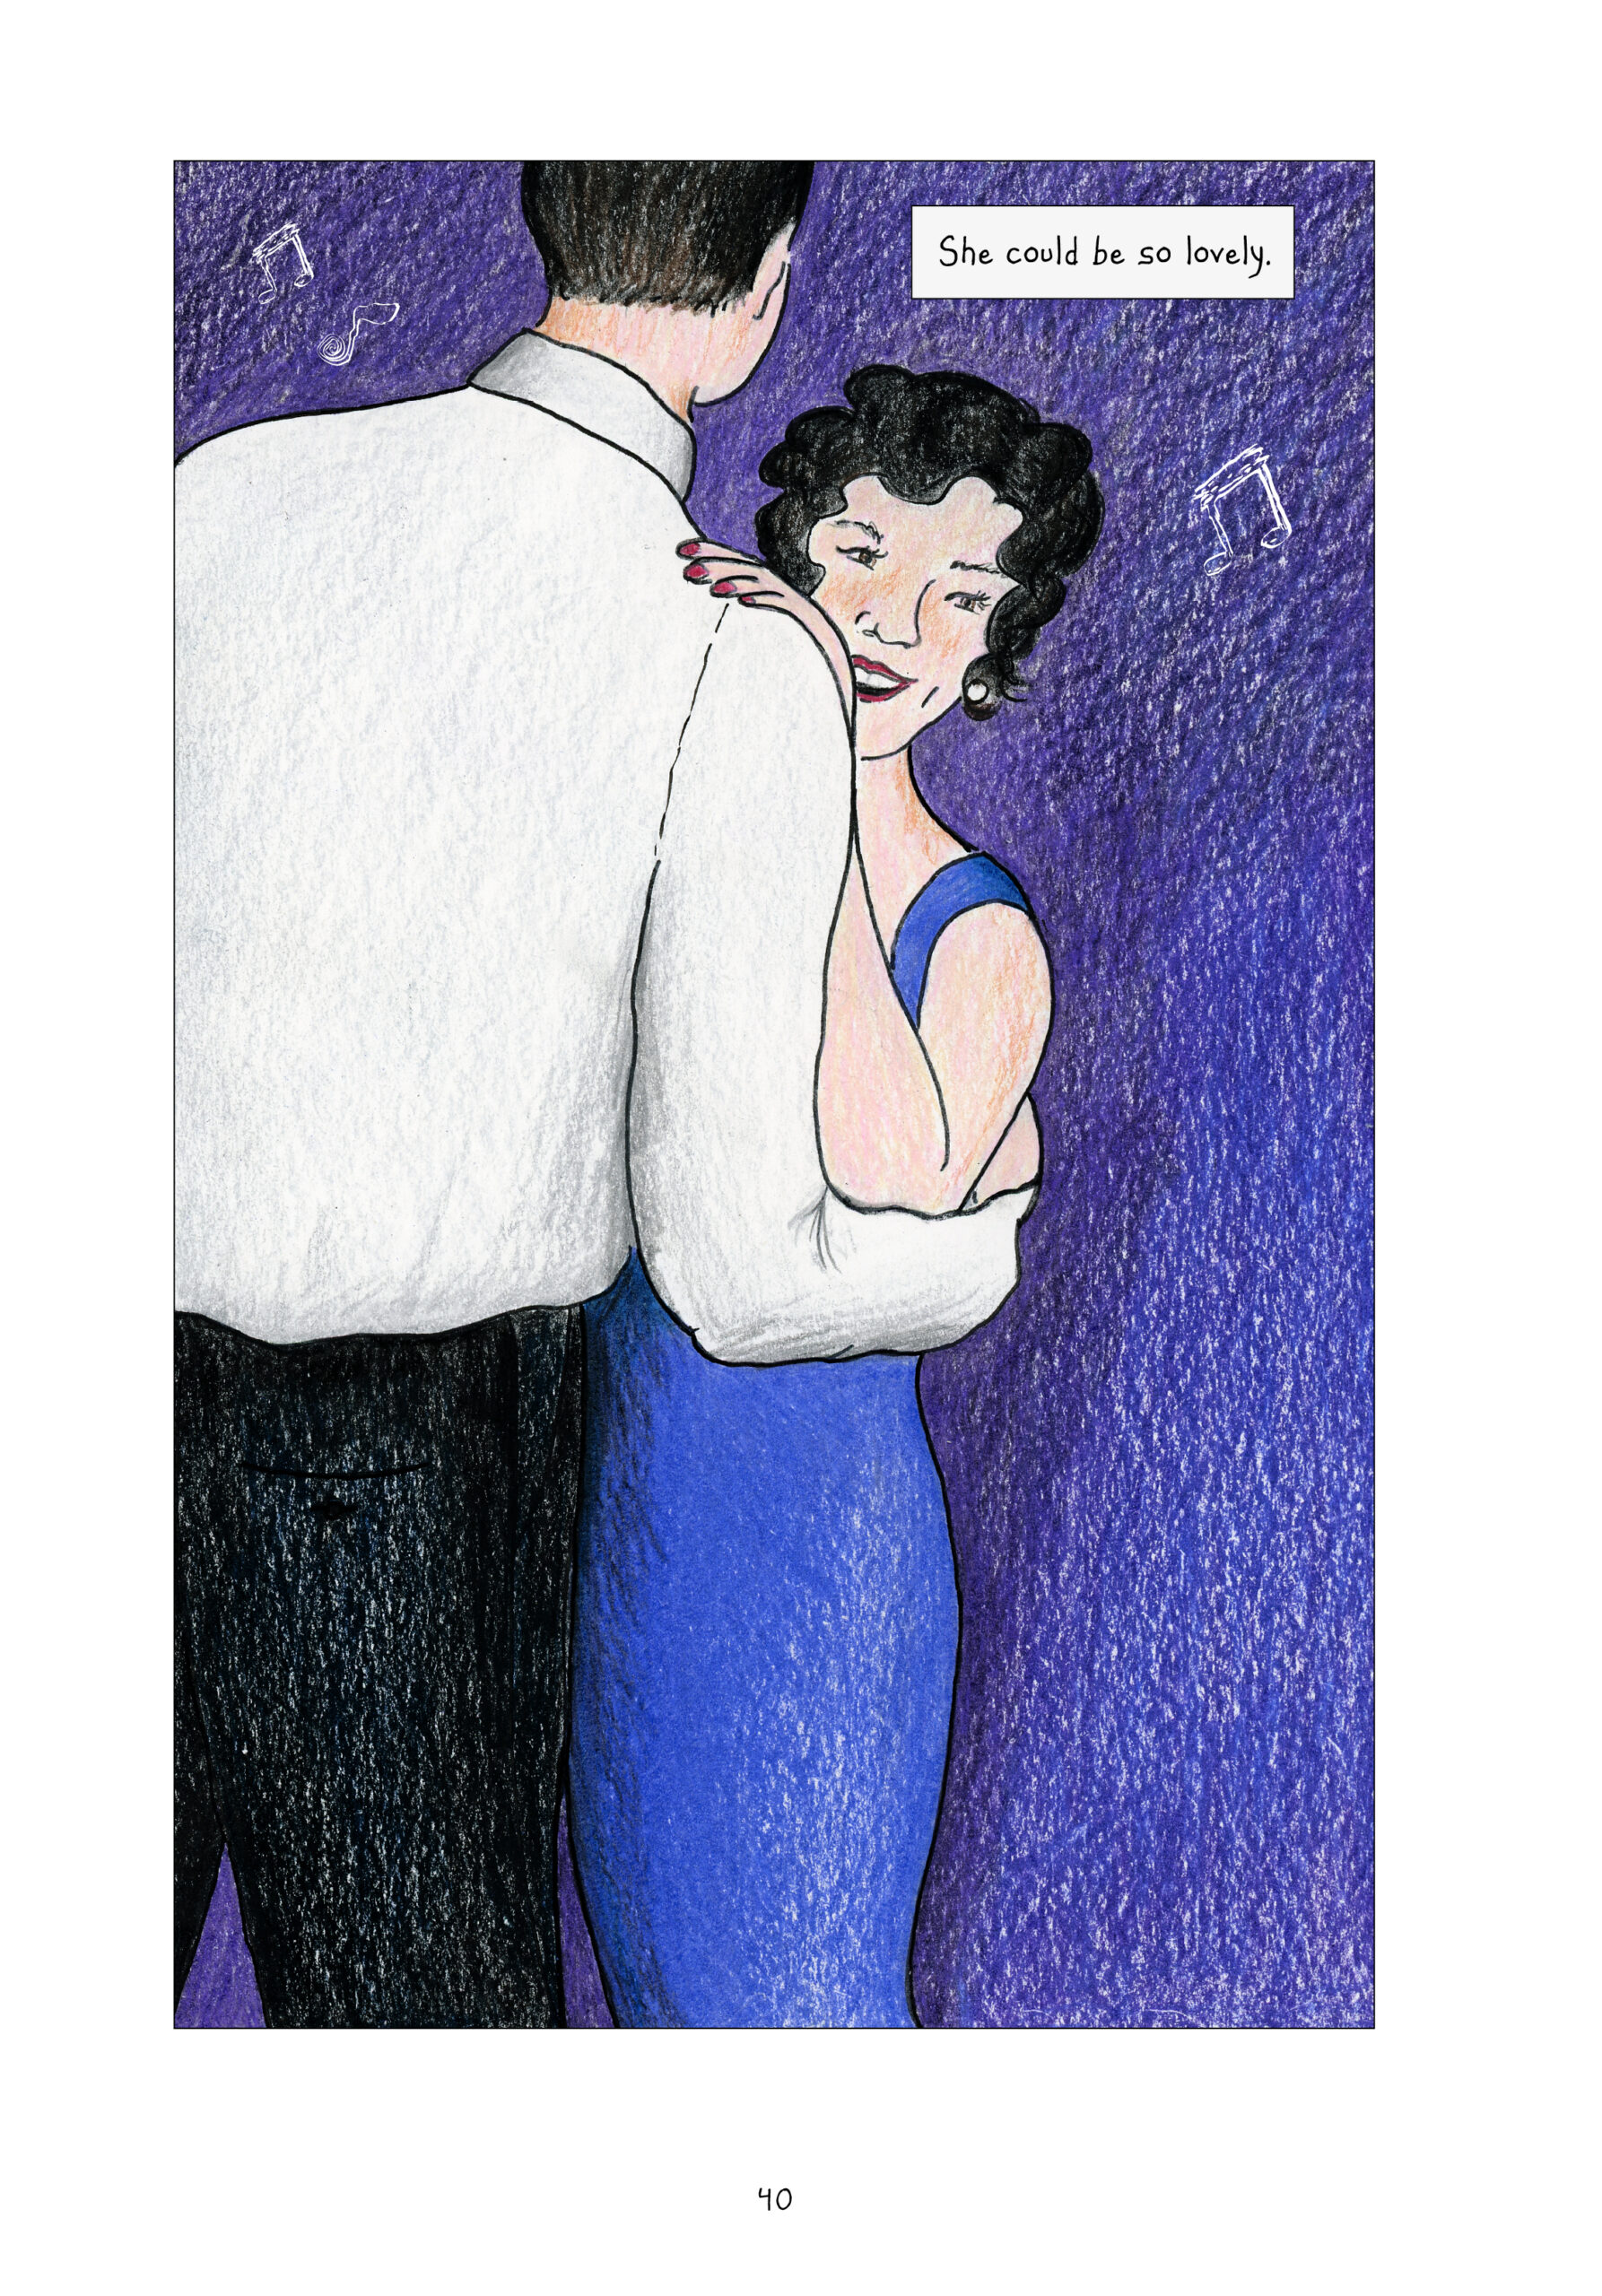 A full page spread of Lorraine slow dancing with her husband. Her hand is on his shoulder, his around her waist. She wears a sleeveless blue evening gown, pearl earrings, red lipstick, and red nail polish. Her hair is wavy and above her shoulders. She looks to the side slightly, smiling widely. Lynn's dad wears a white button down and black pants. There is music playing in the background, and they are surrounded by a wash of indigo. 
"She could be so lovely."